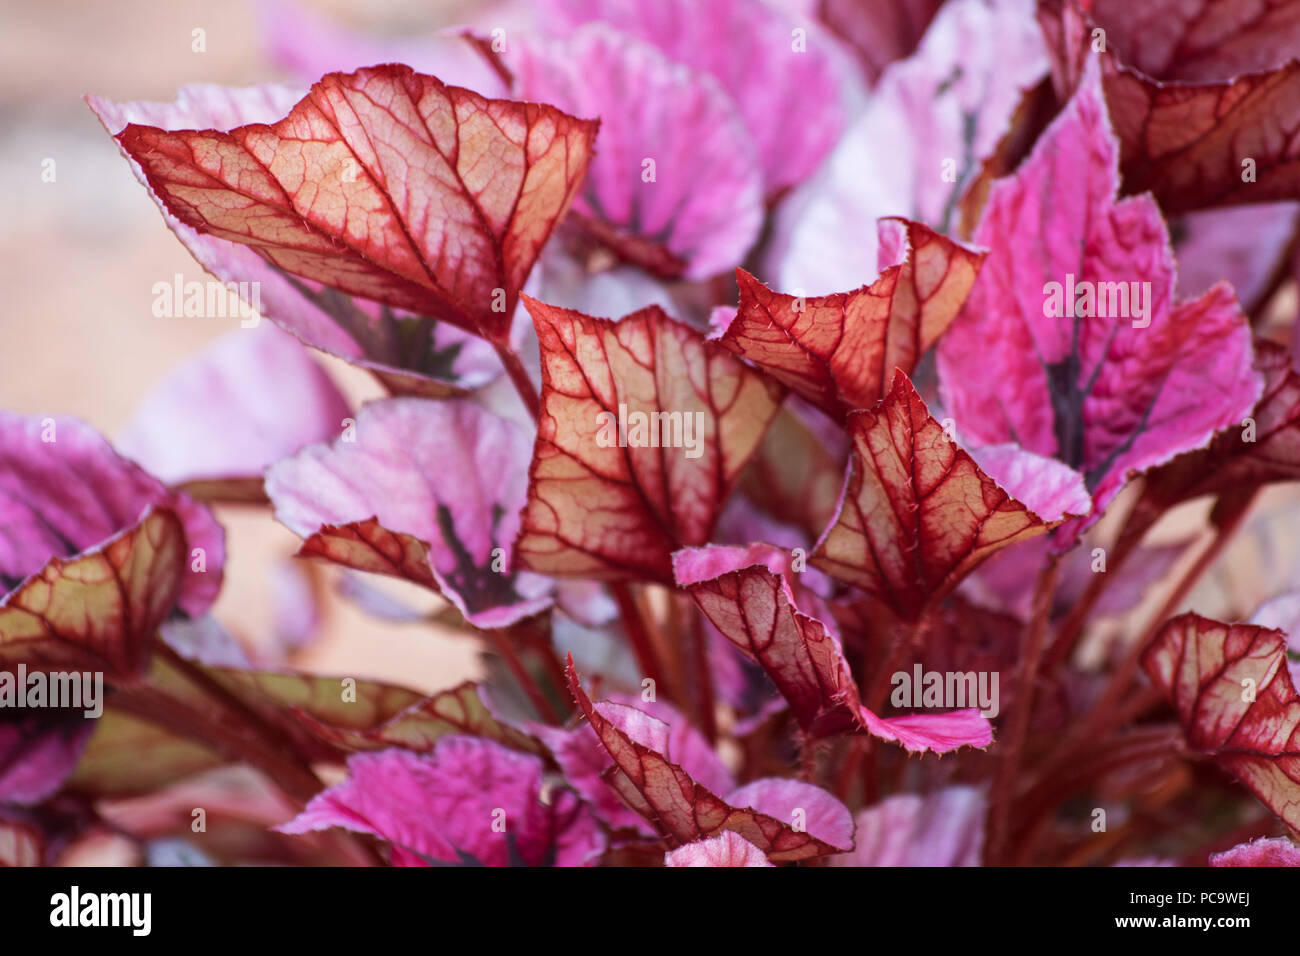 Red bull begonia plant Stock Photo